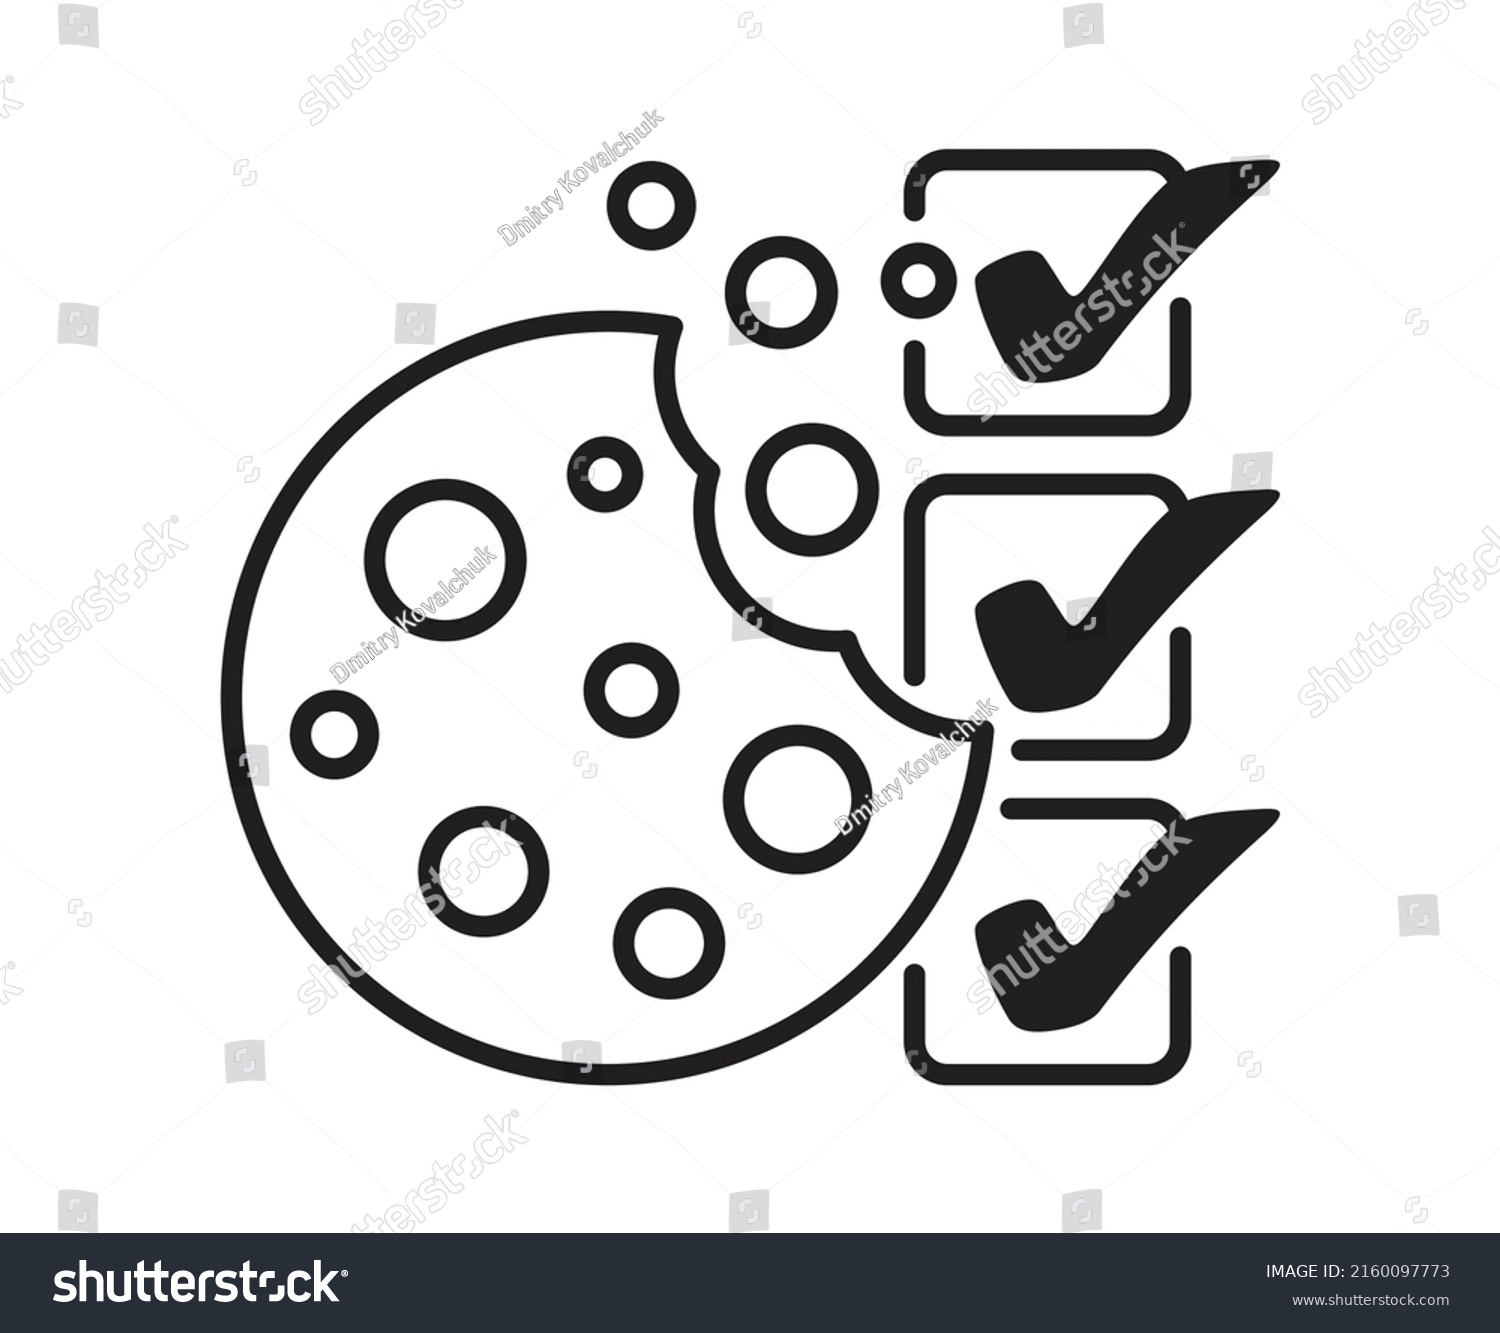 SVG of Manage and accept of Cookies in websites. Pictogram for pop-up window with cookie and checklist svg